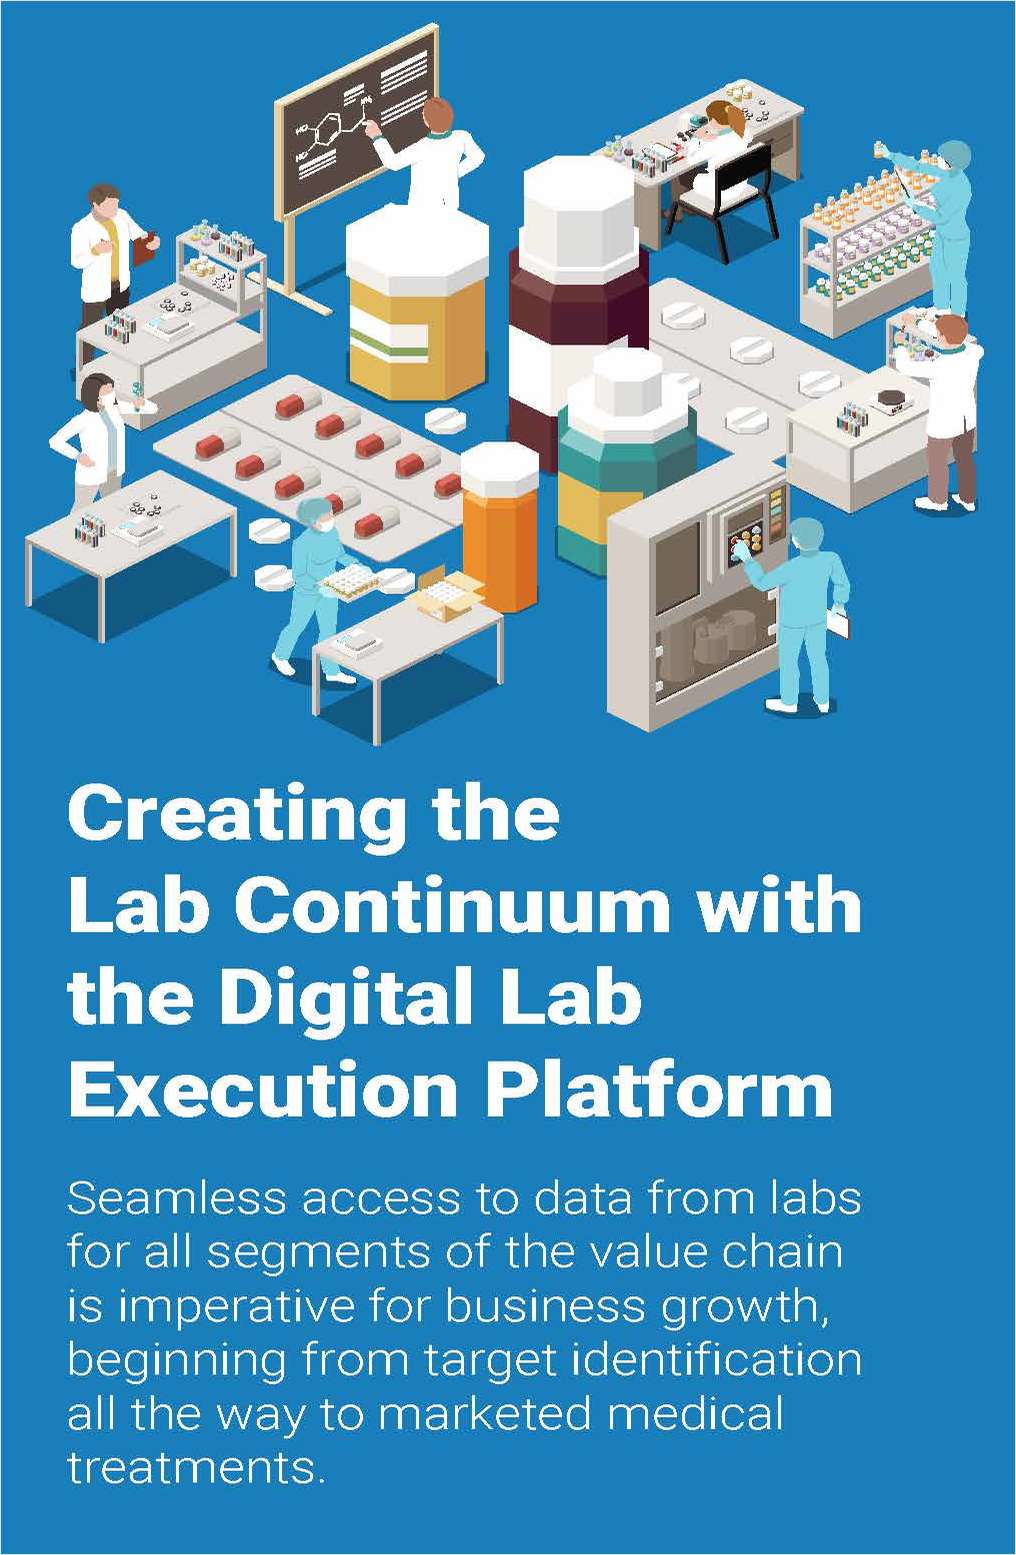 Creating the Lab Continuum with the Digital Lab Execution Platform